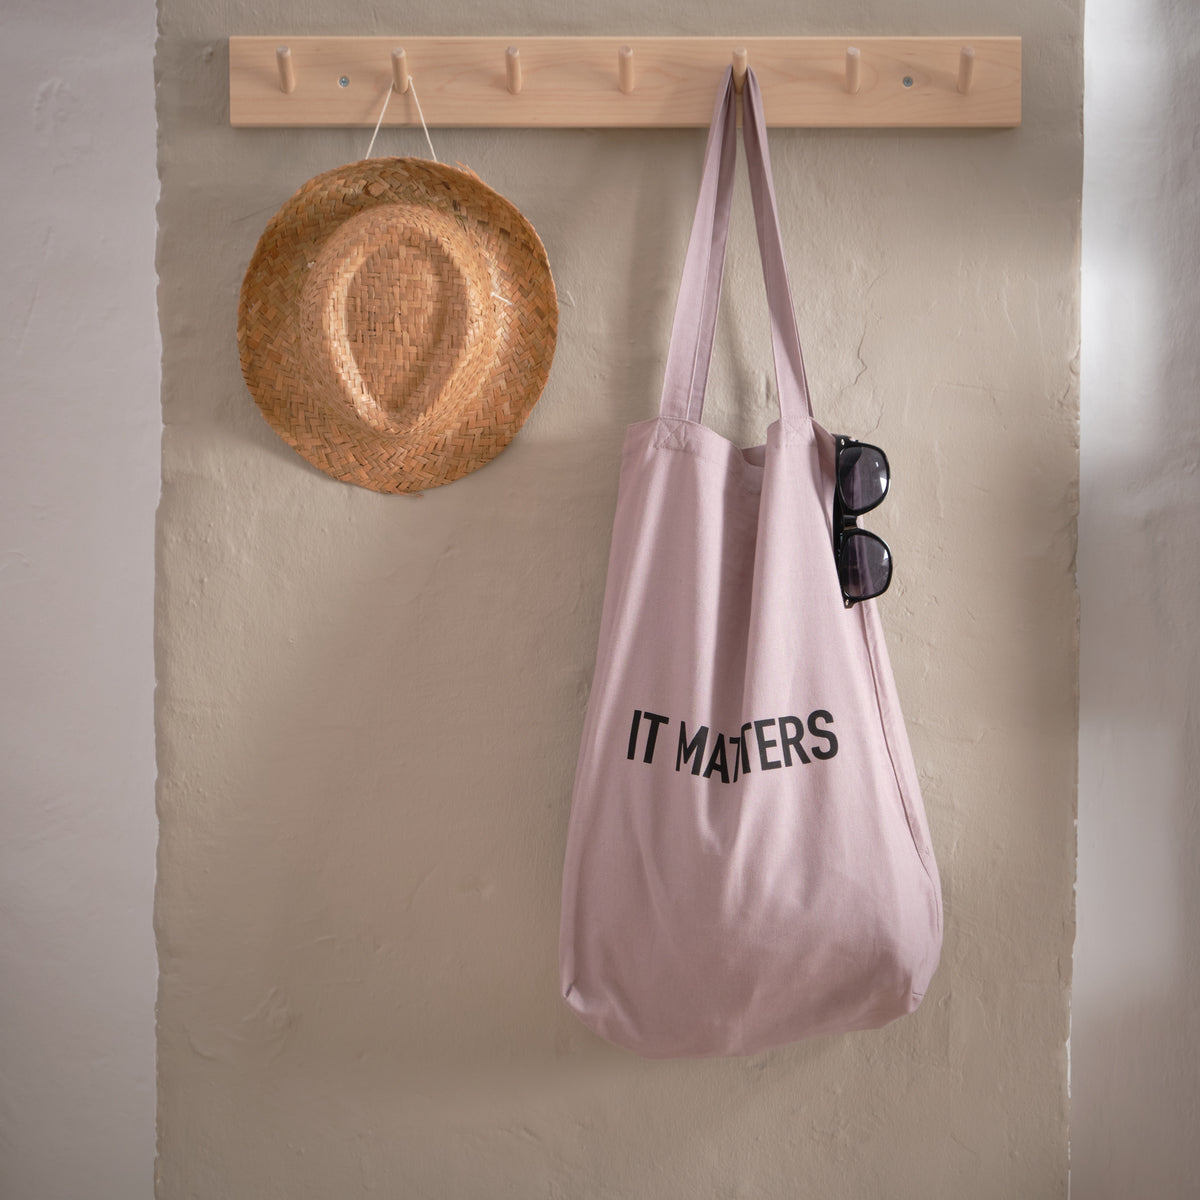 Bag with a message that matters! Dusty lavender light pink  grocery, hobby, office, school and handbag made in organic cotton. Danish. Scandinavian.